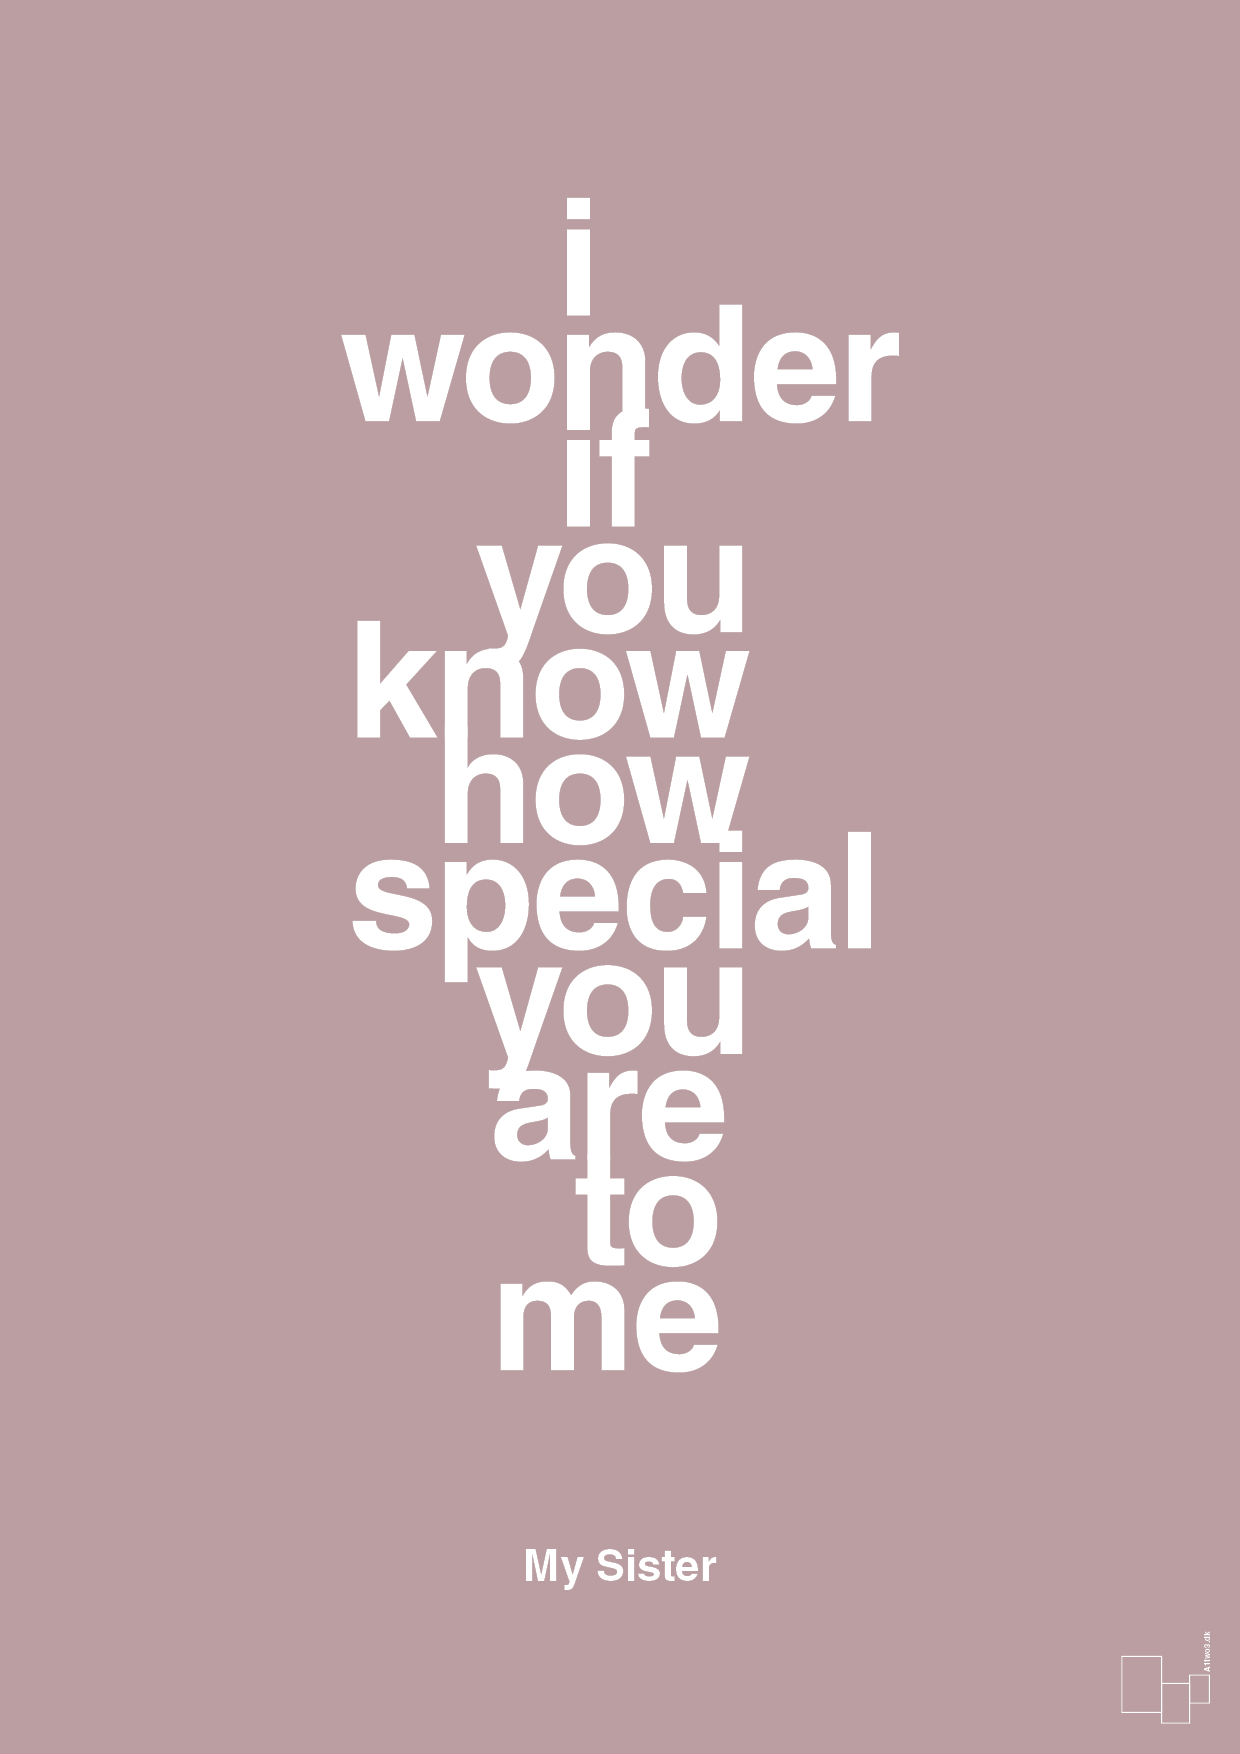 my sister - i wonder if you know how special you are to me - Plakat med Citater i Light Rose